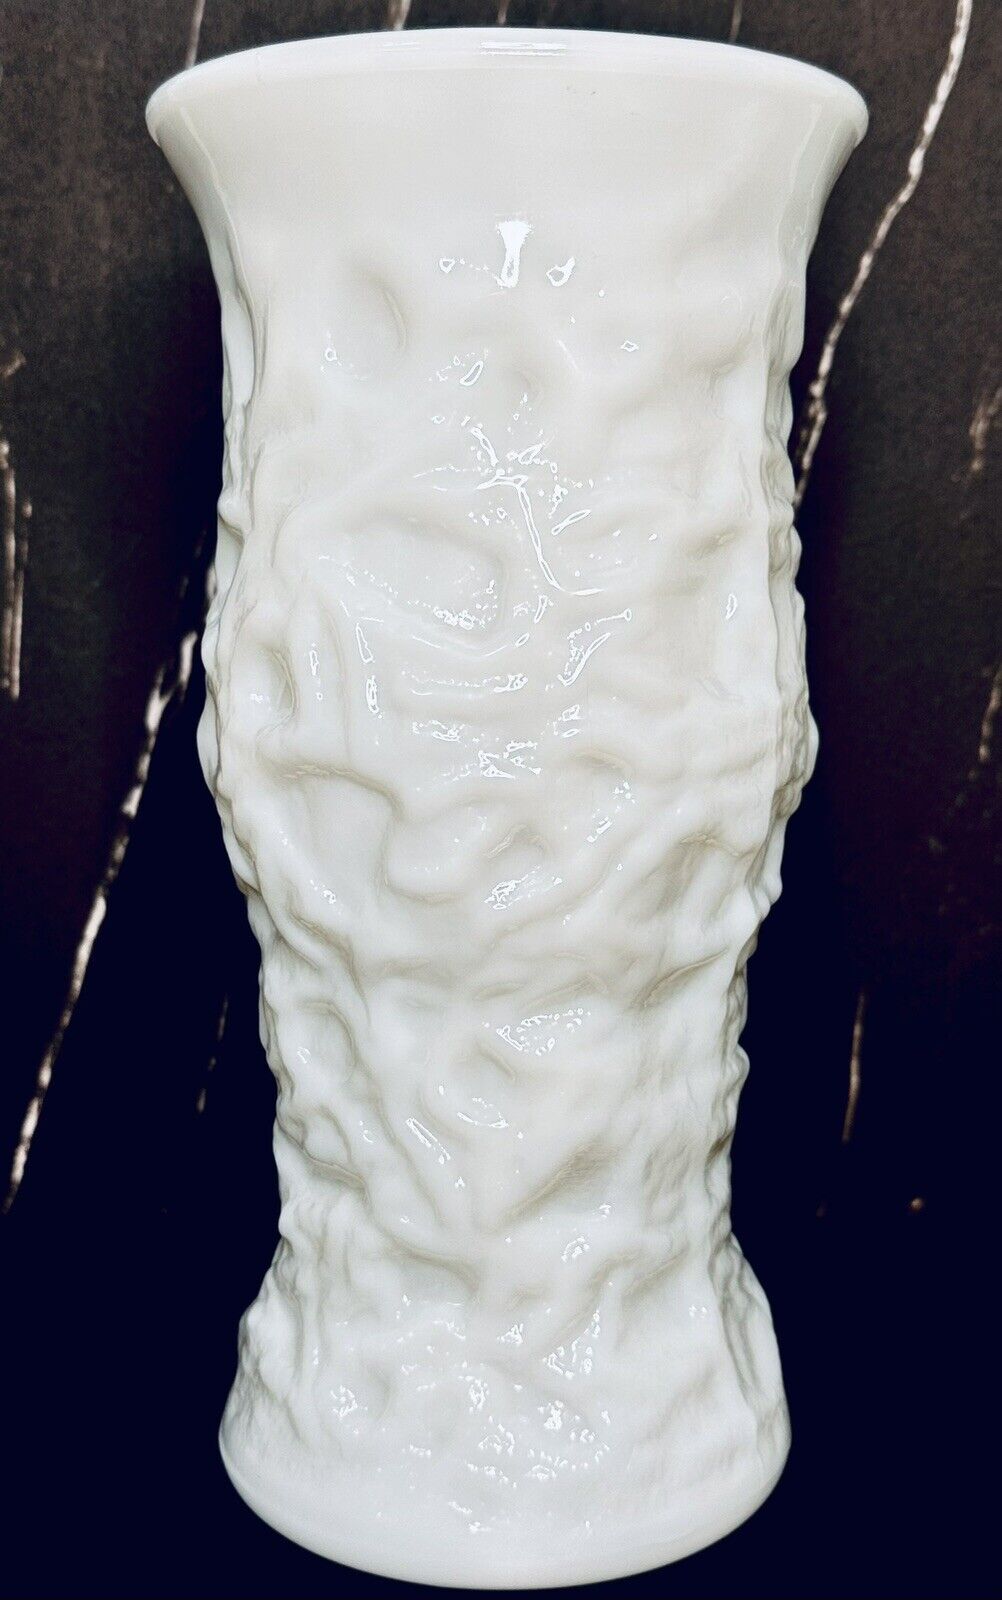 Vintage Large Wrinkled Abstract Textured Vase White Milk Glass Brody Co. 9.5”